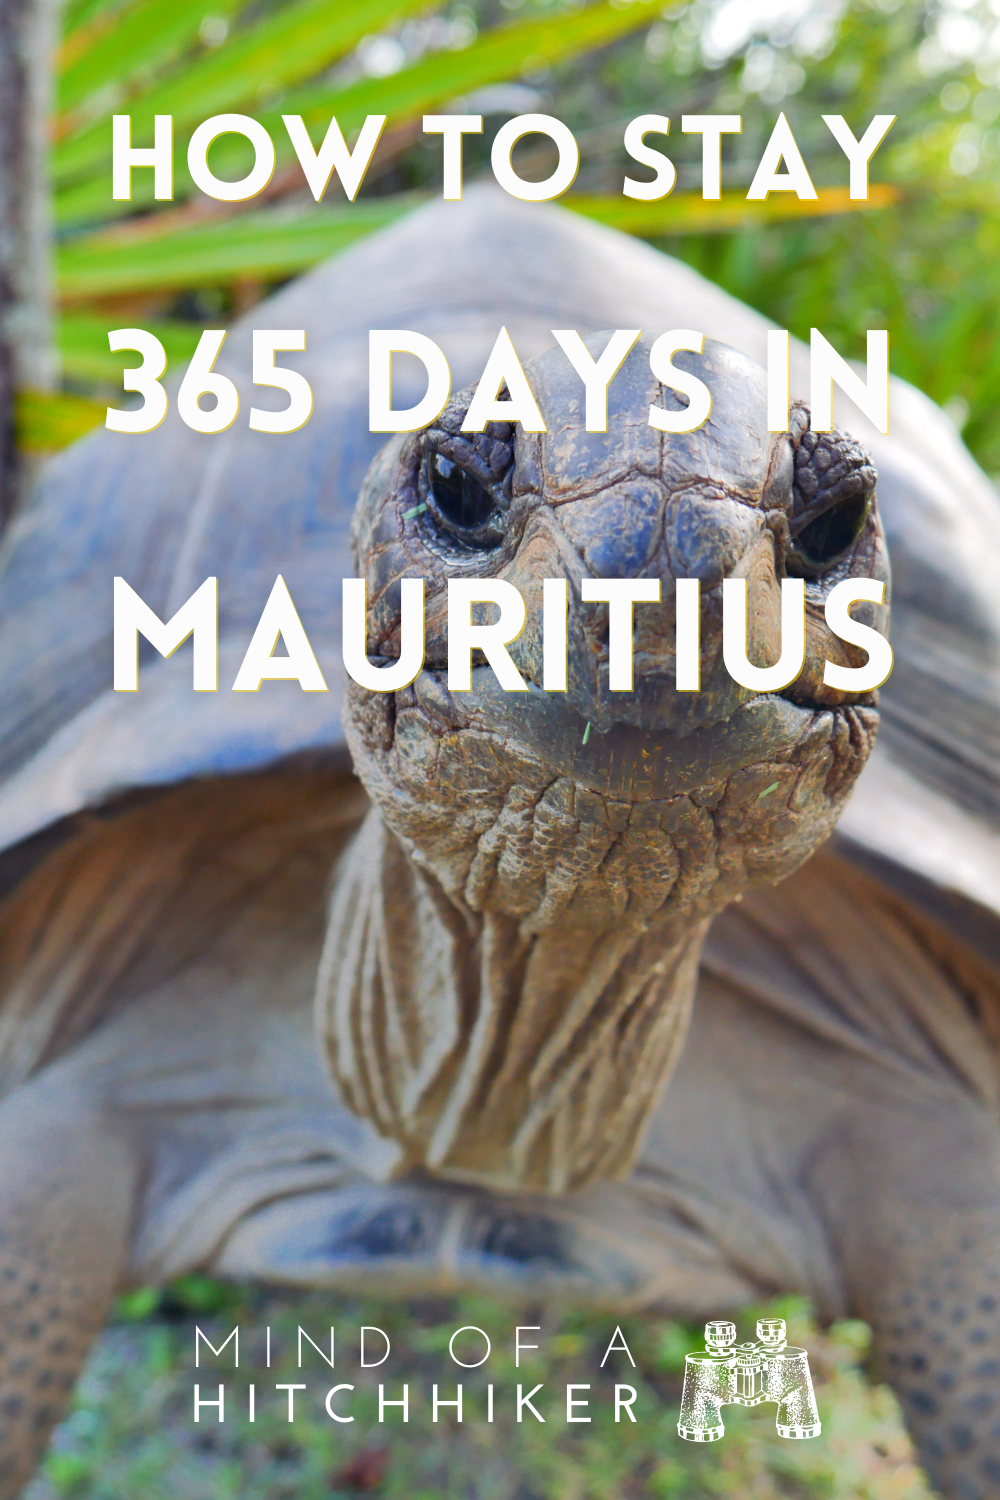 staying 365 days in mauritius work remotely